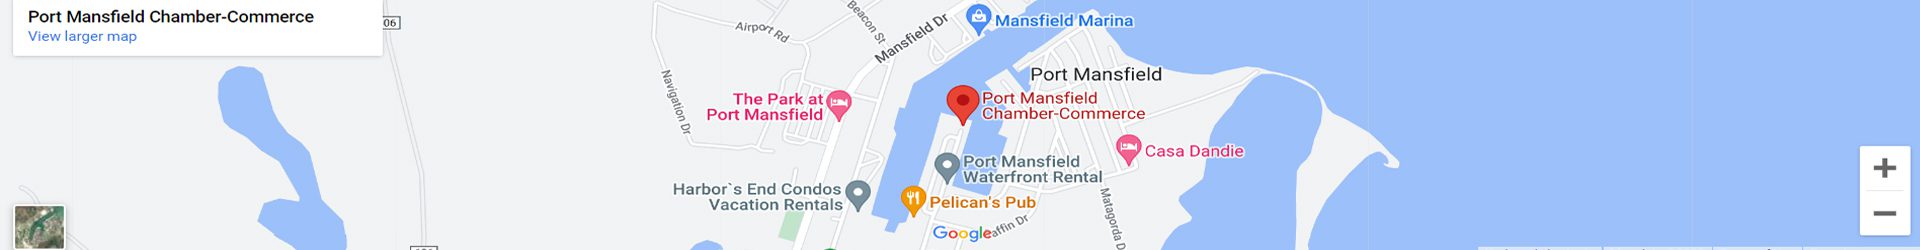 Port Mansfield Chamber of Commerce map